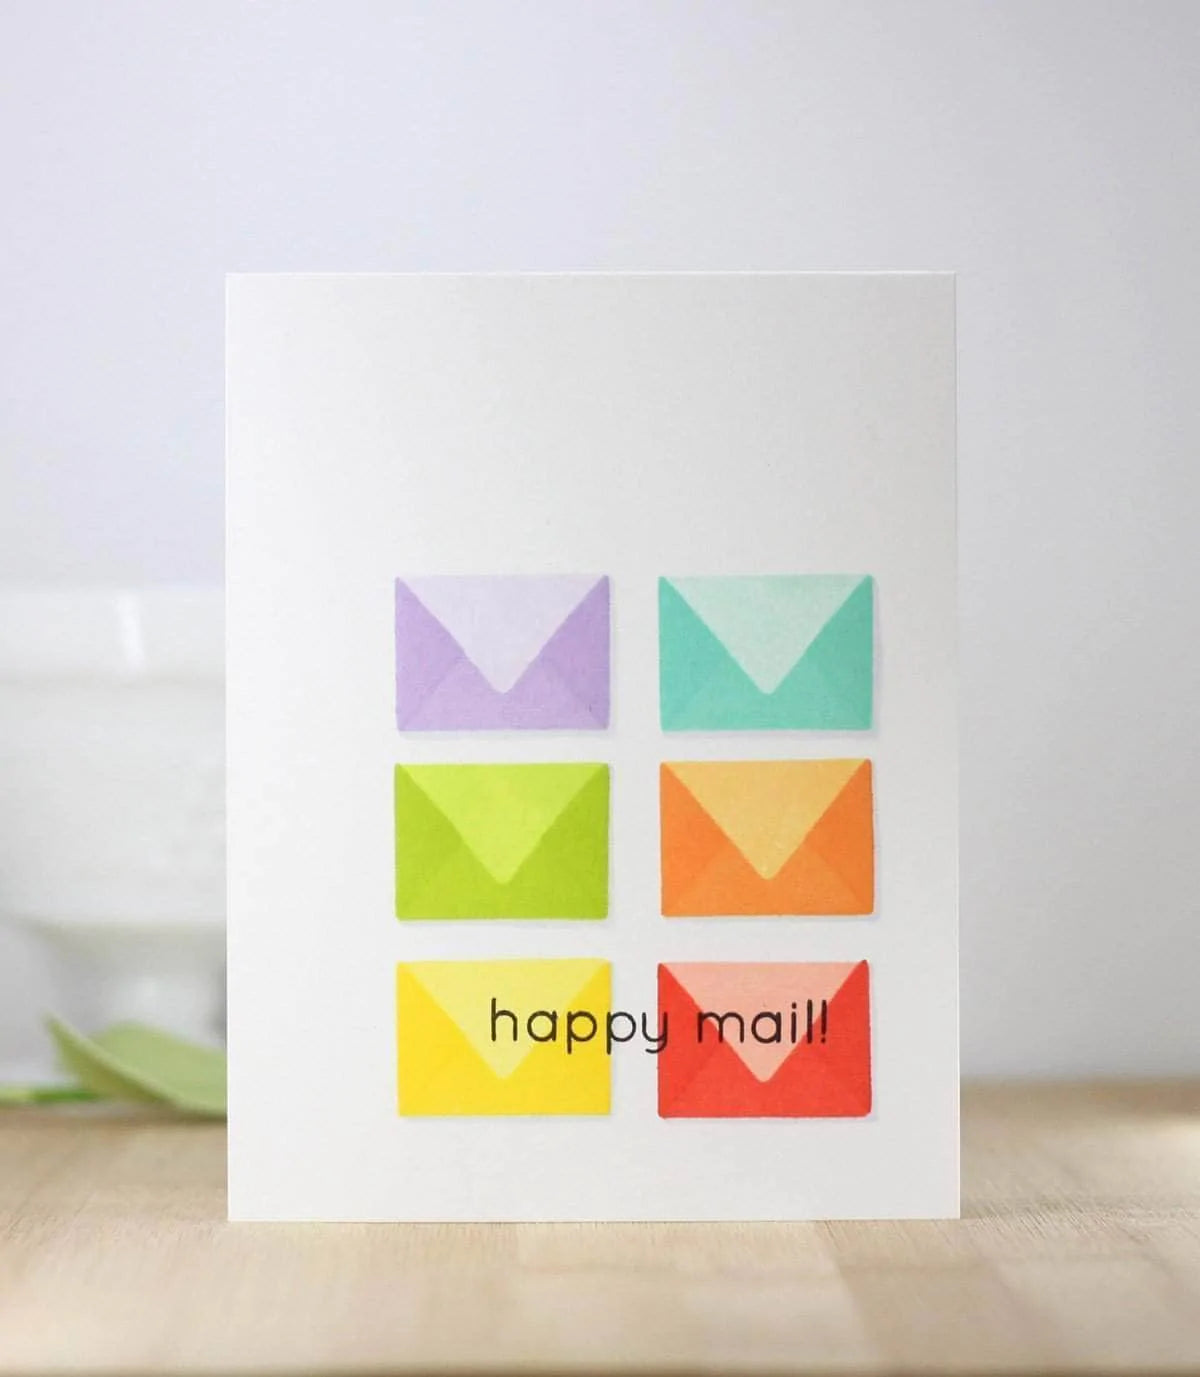 Clear Stamps Snail Mail Stamp Set